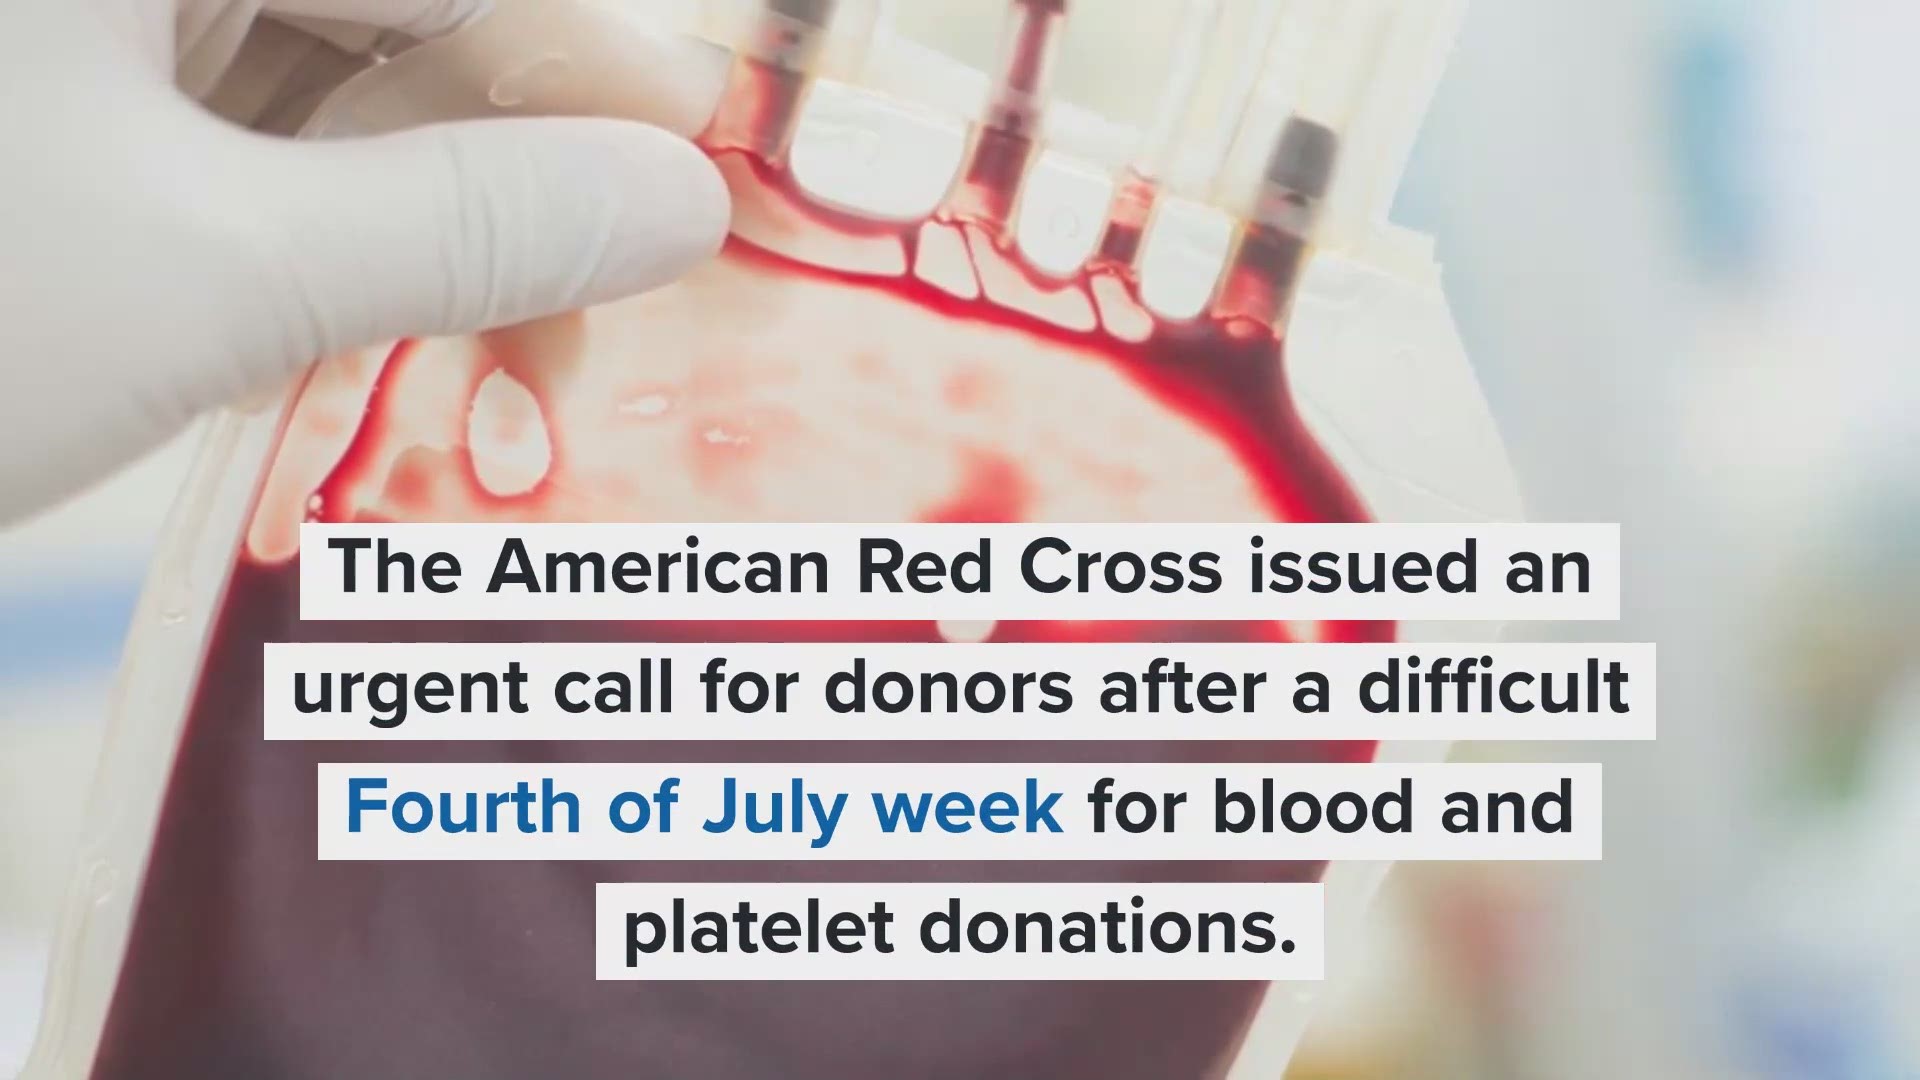 Officials said they need people of all blood types to give now and prevent delays in medical care for local patients.